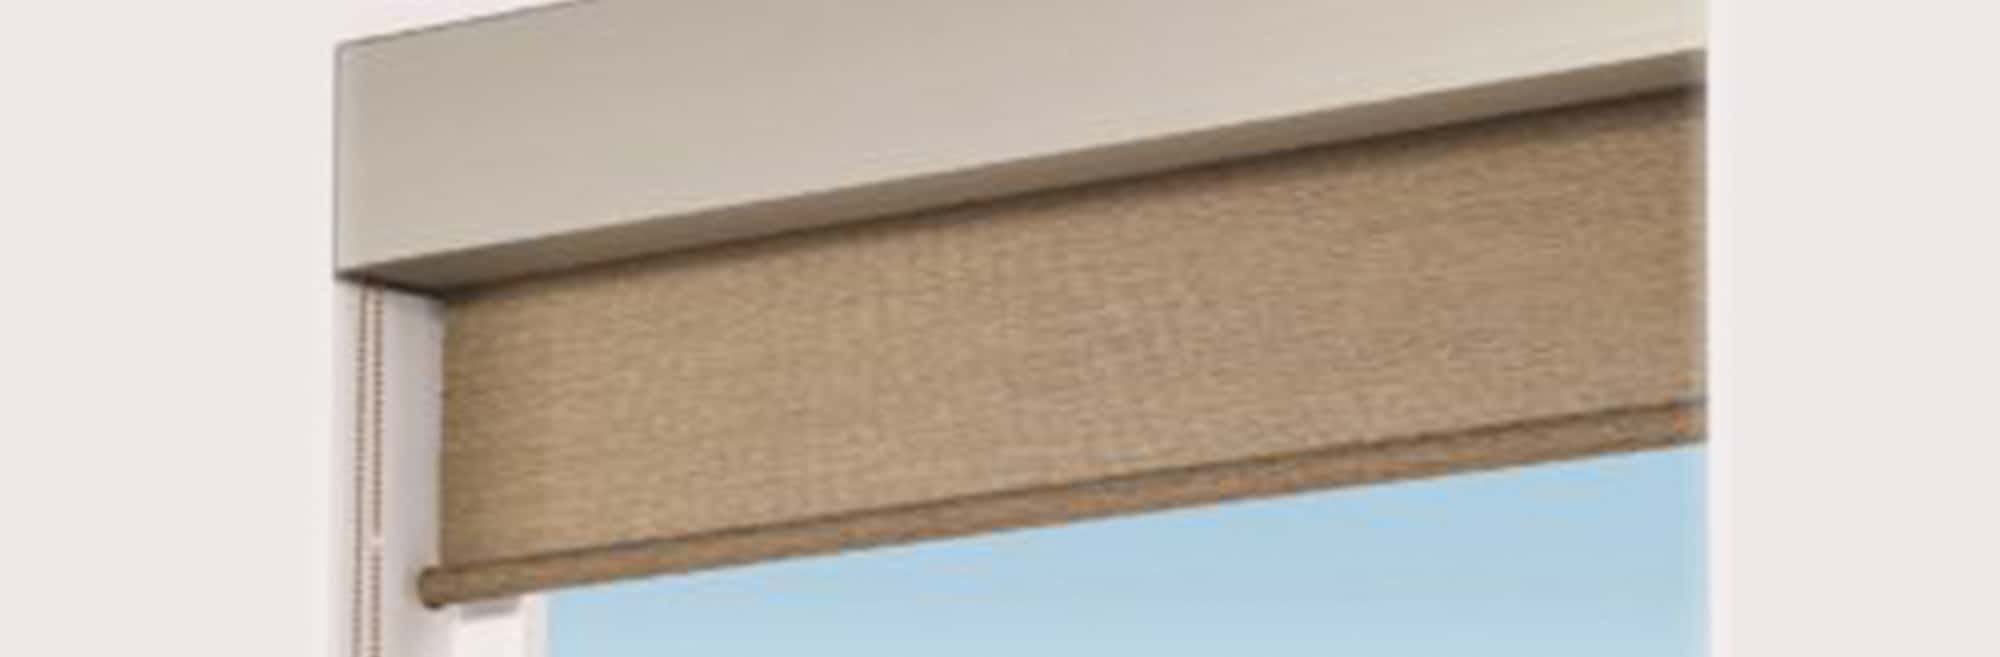 roller-shades-graber-pic-4